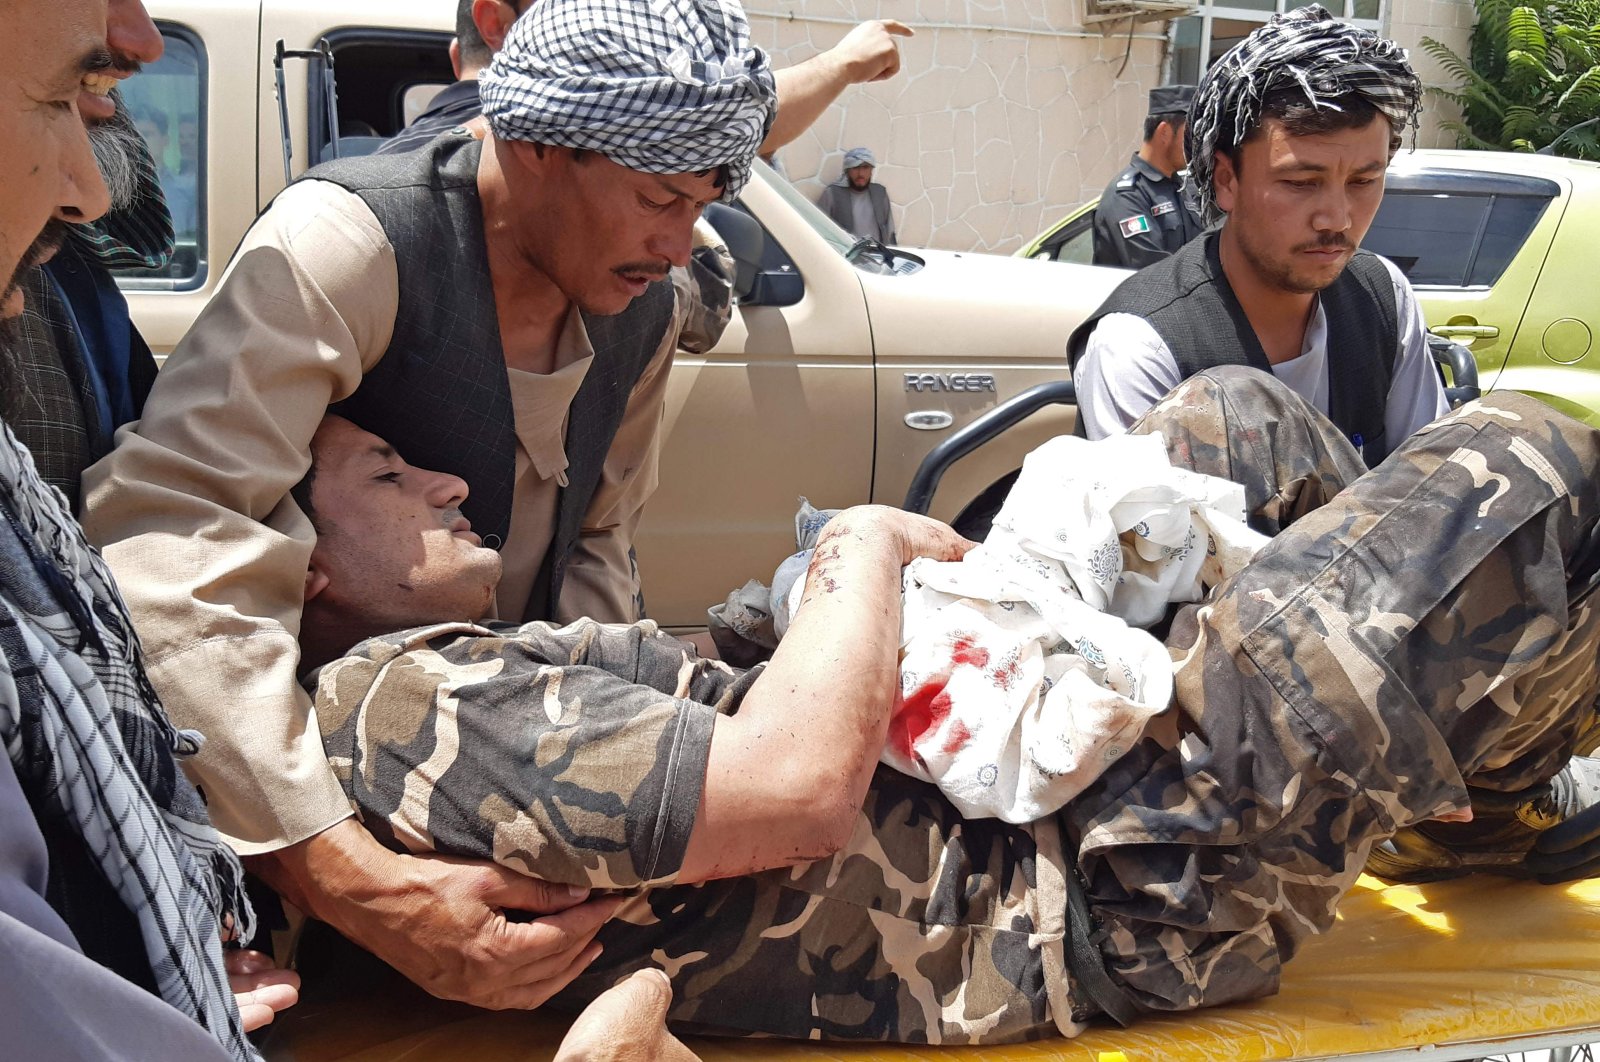 A wounded National Directorate of Security (NDS) personnel is brought on a stretcher to a hospital after a car bomb exploded in Aybak, northern Samangan province, Afghanistan, July 13, 2020. (AFP Photo)